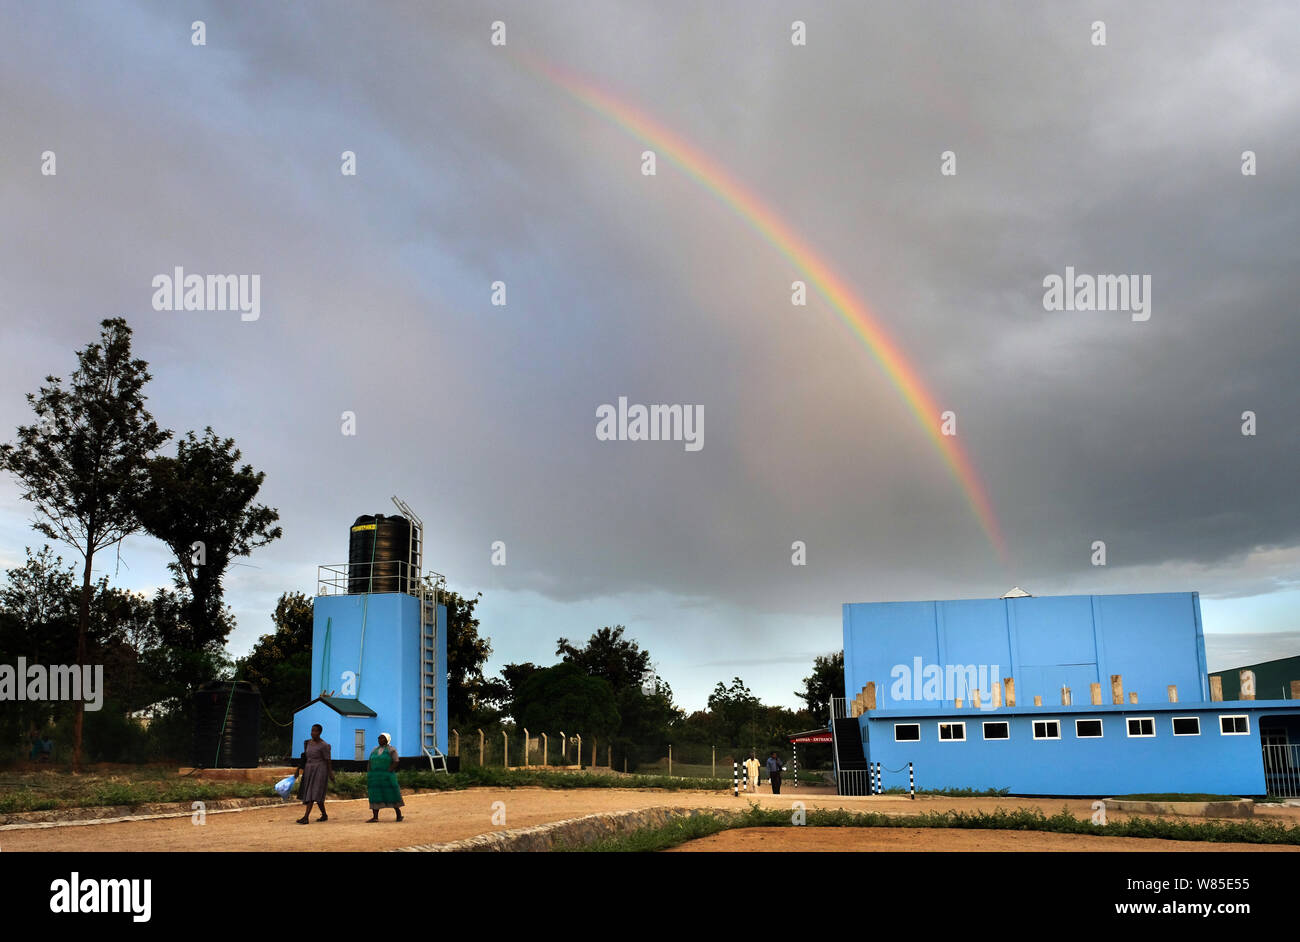 Rainbow over the catholic St. Clare Clinic of the German missionary doctor Thomas Brei, in Mwanza, Tanzania, Africa Stock Photo